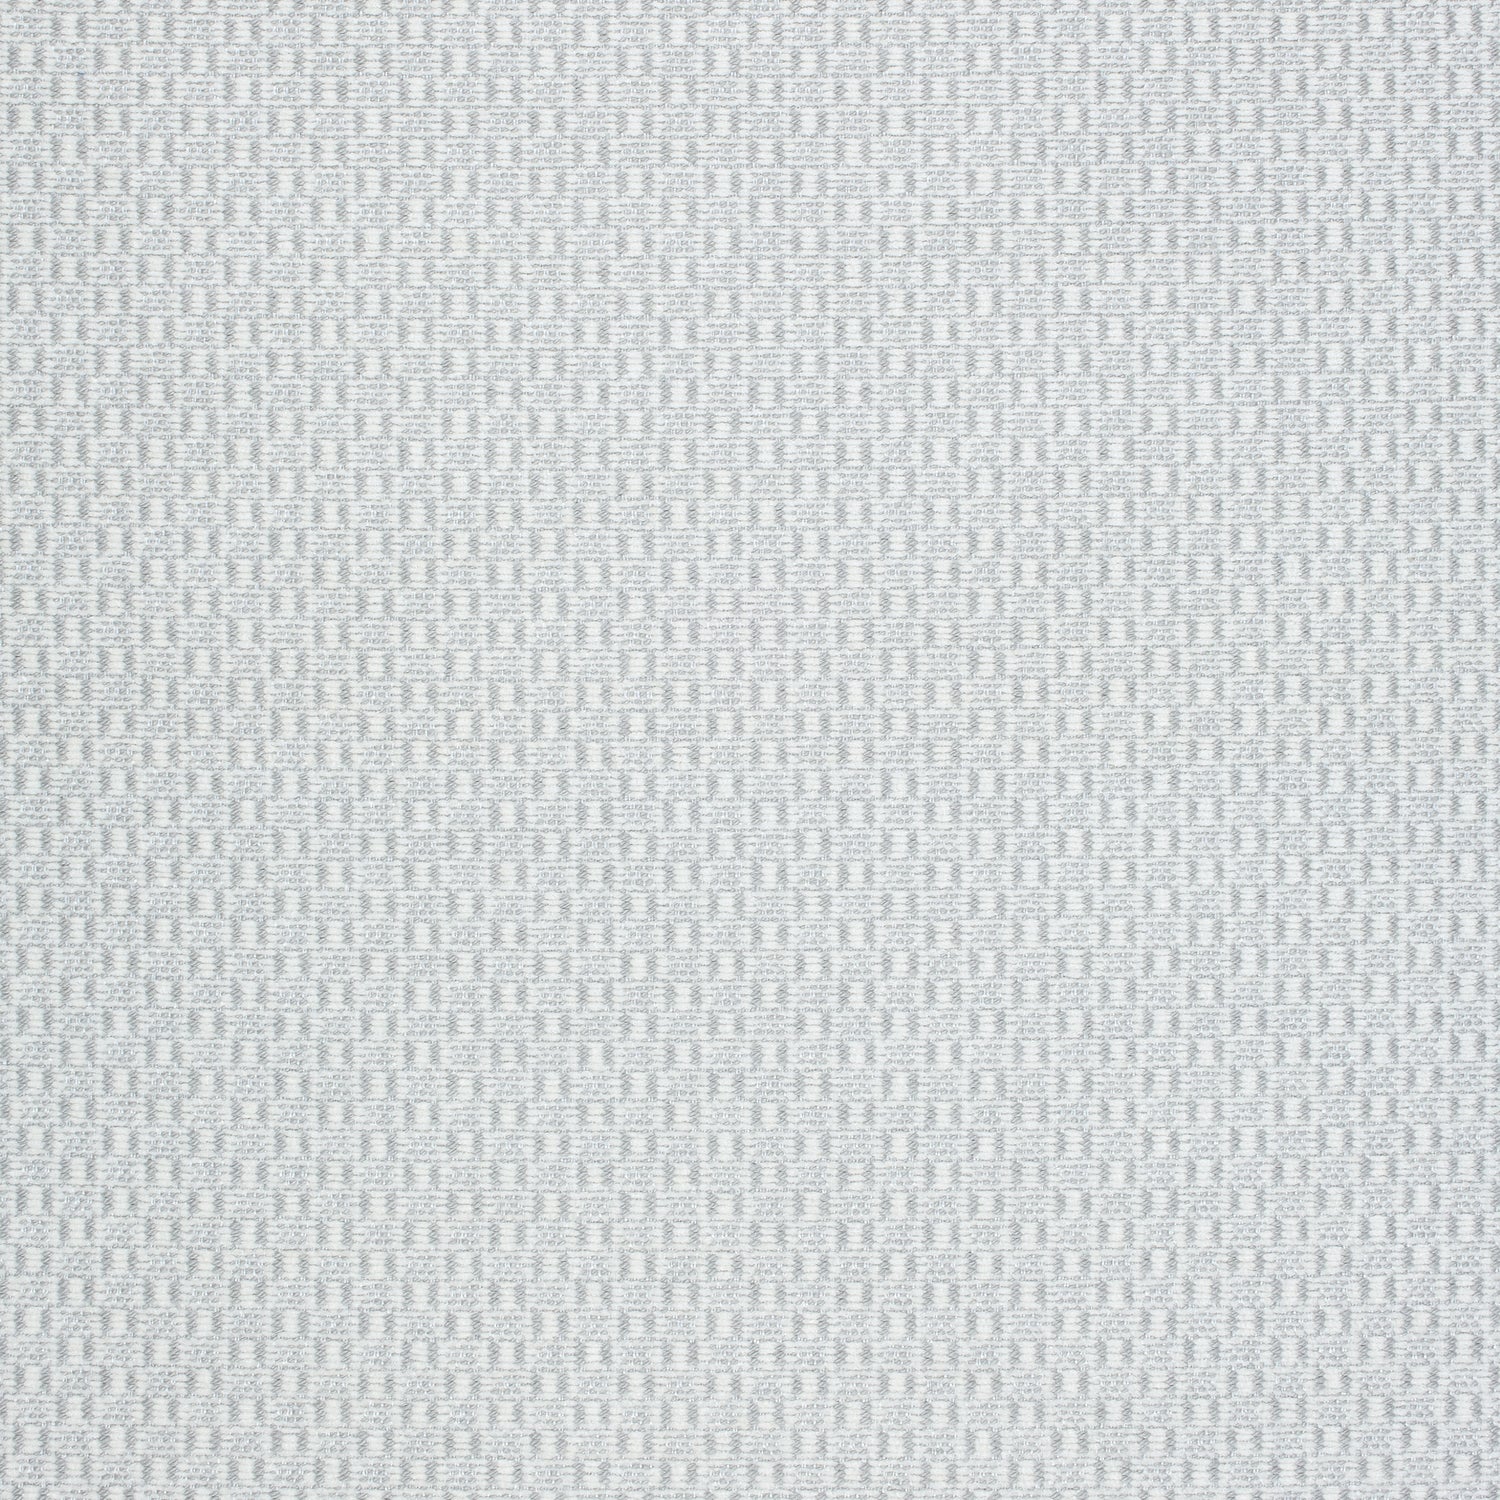 Emilie fabric in sterling grey color - pattern number W789140 - by Thibaut in the Reverie collection